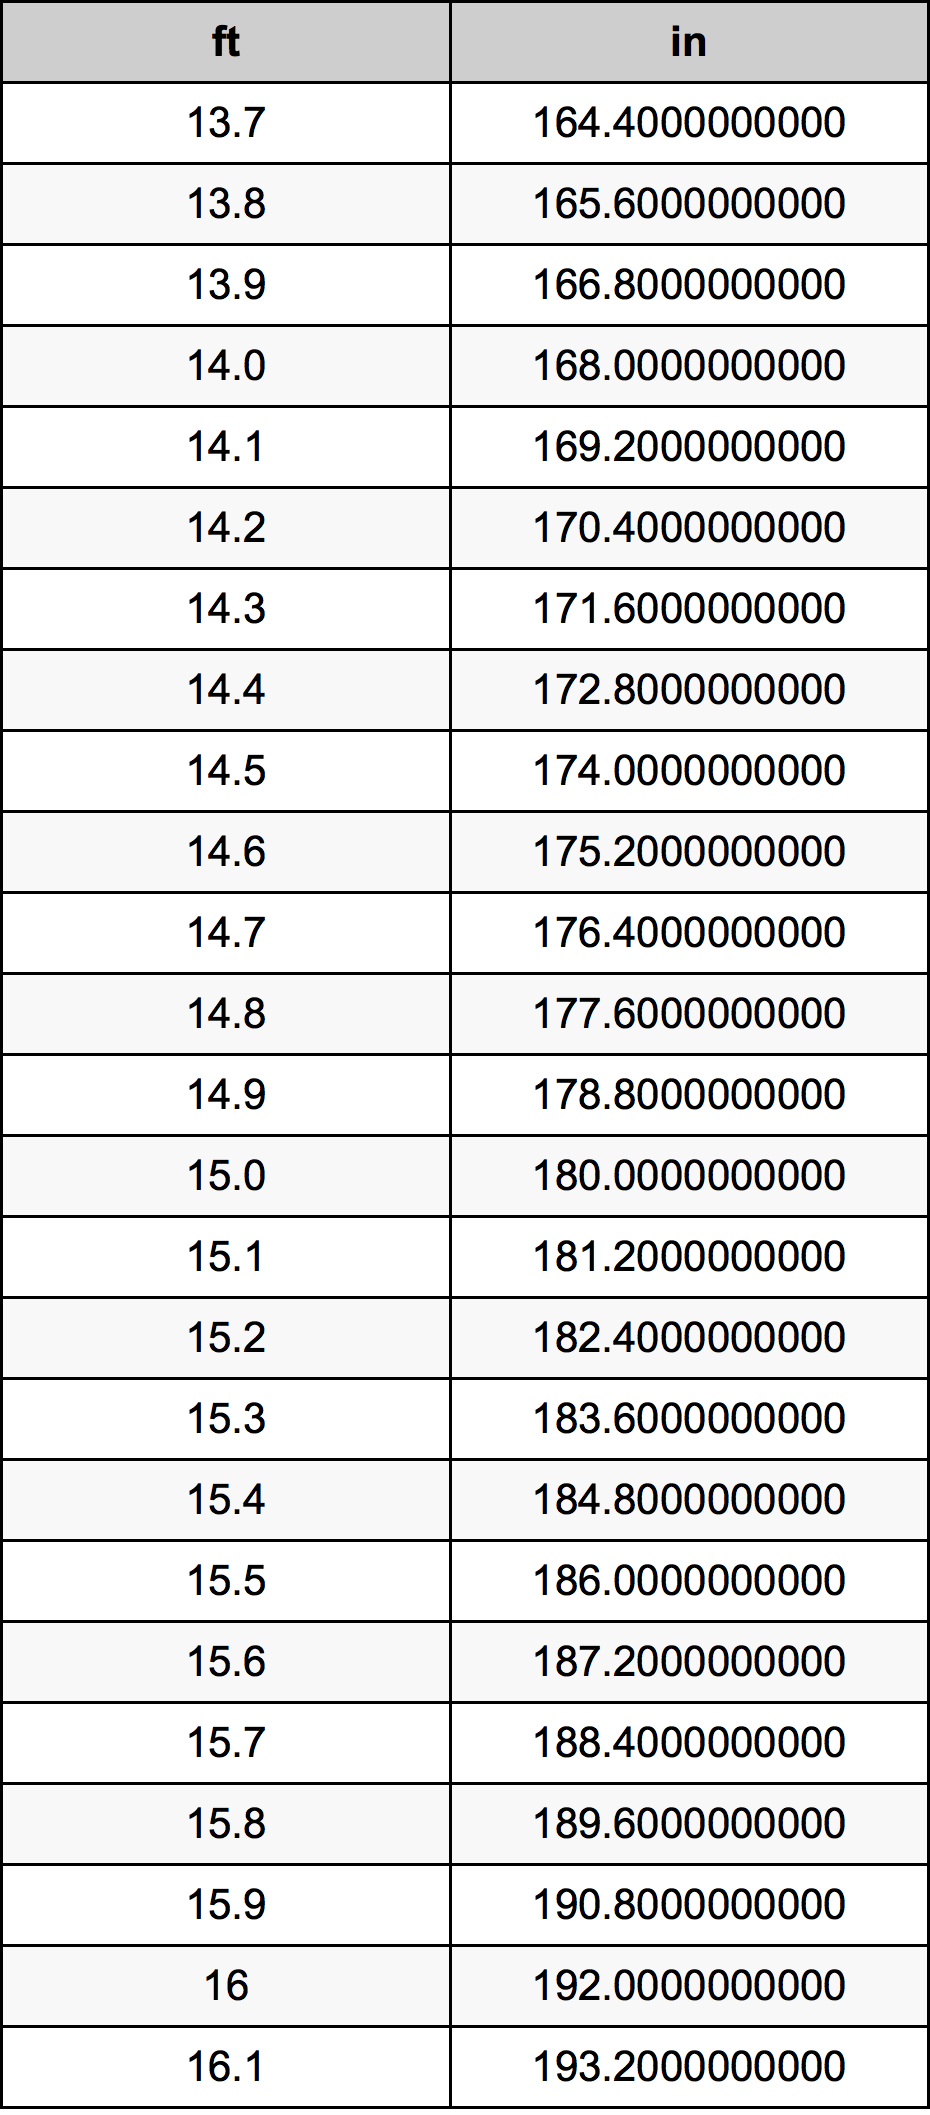 14 9 Feet To Inches Converter 14 9 Ft To In Converter Feet to inches (ft to in) conversion calculator for length conversions with additional tables and formulas. 14 9 feet to inches converter 14 9 ft